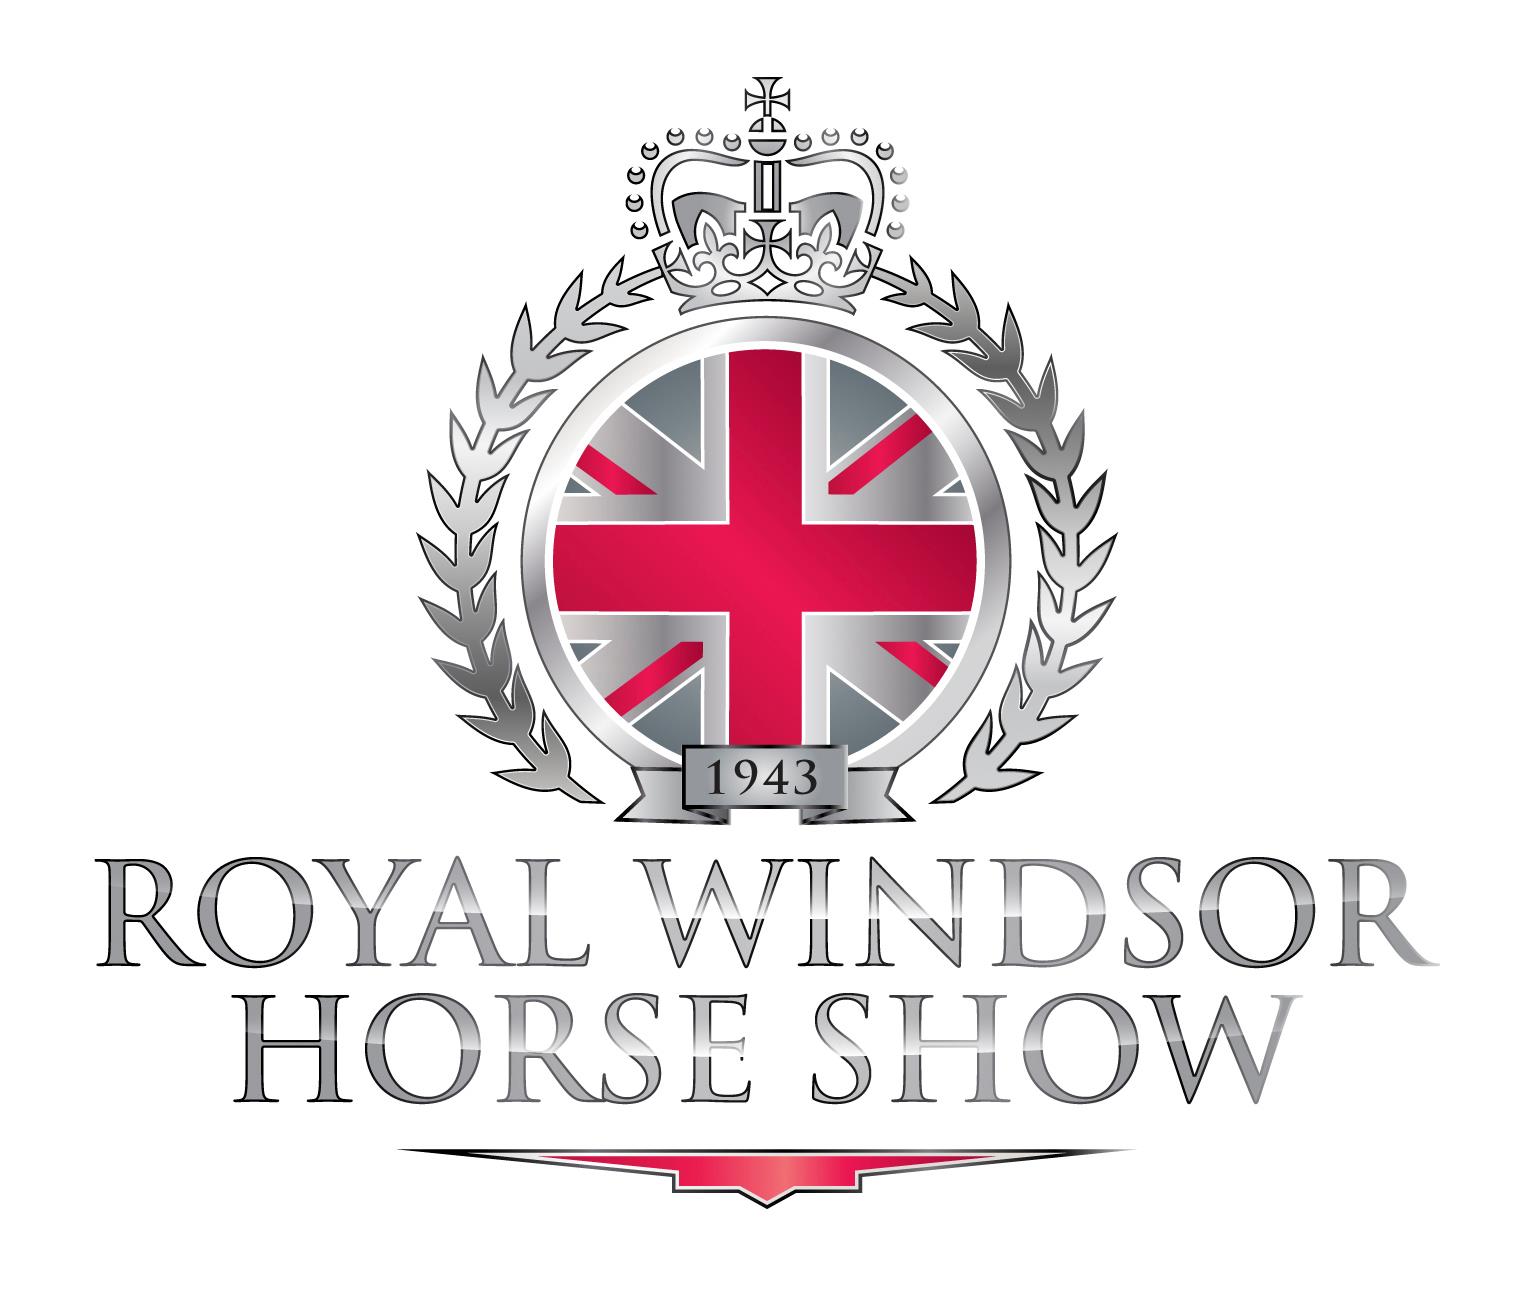 Royal Windsor Horse Show looses 1* because of administrative error of BEF.